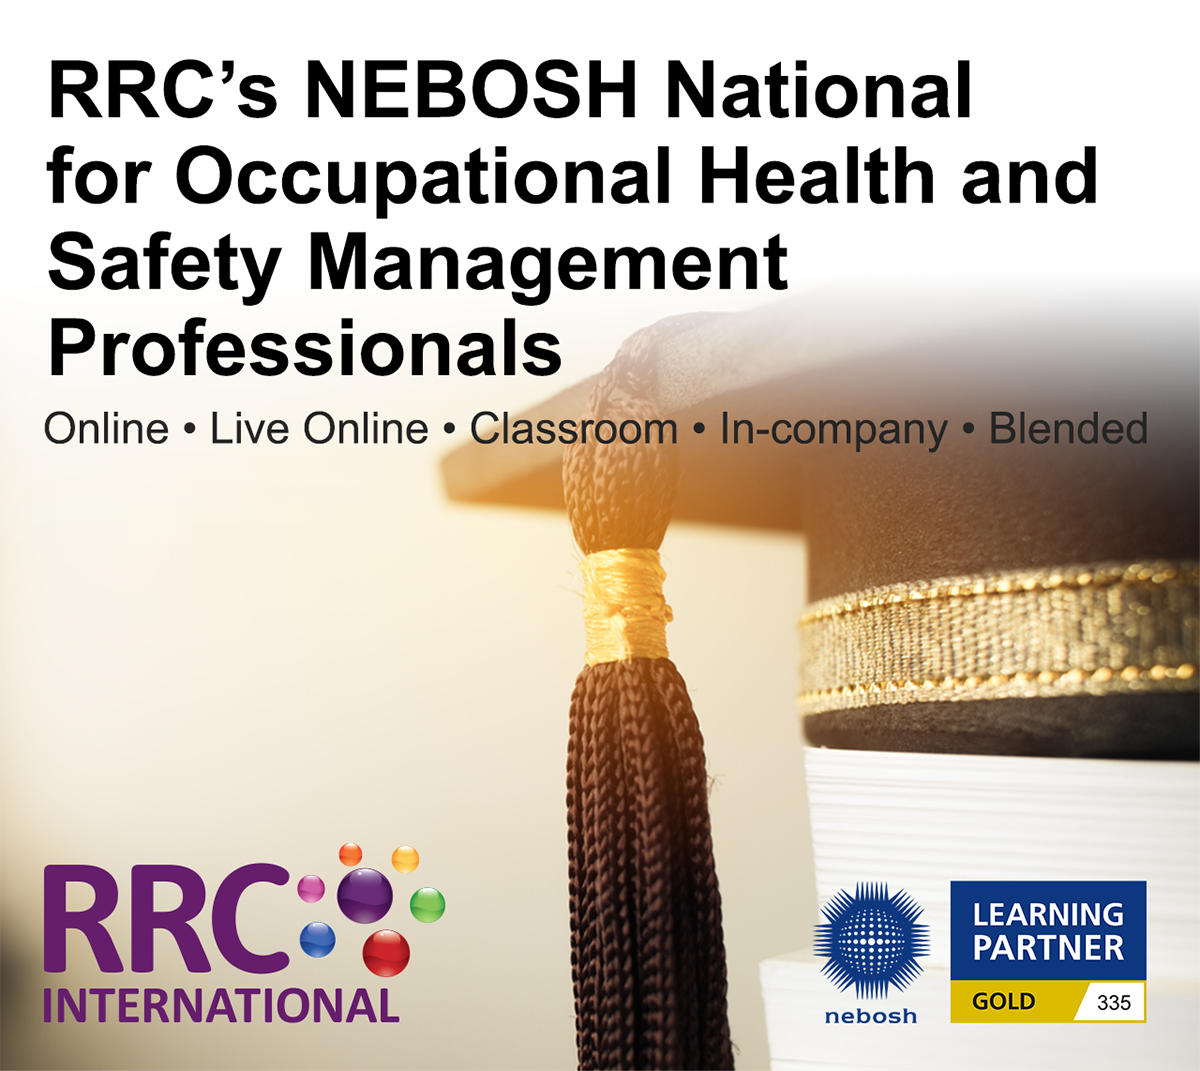 RRC's NEBOSH National Diploma for Occupational Health and Safety Management Professionals